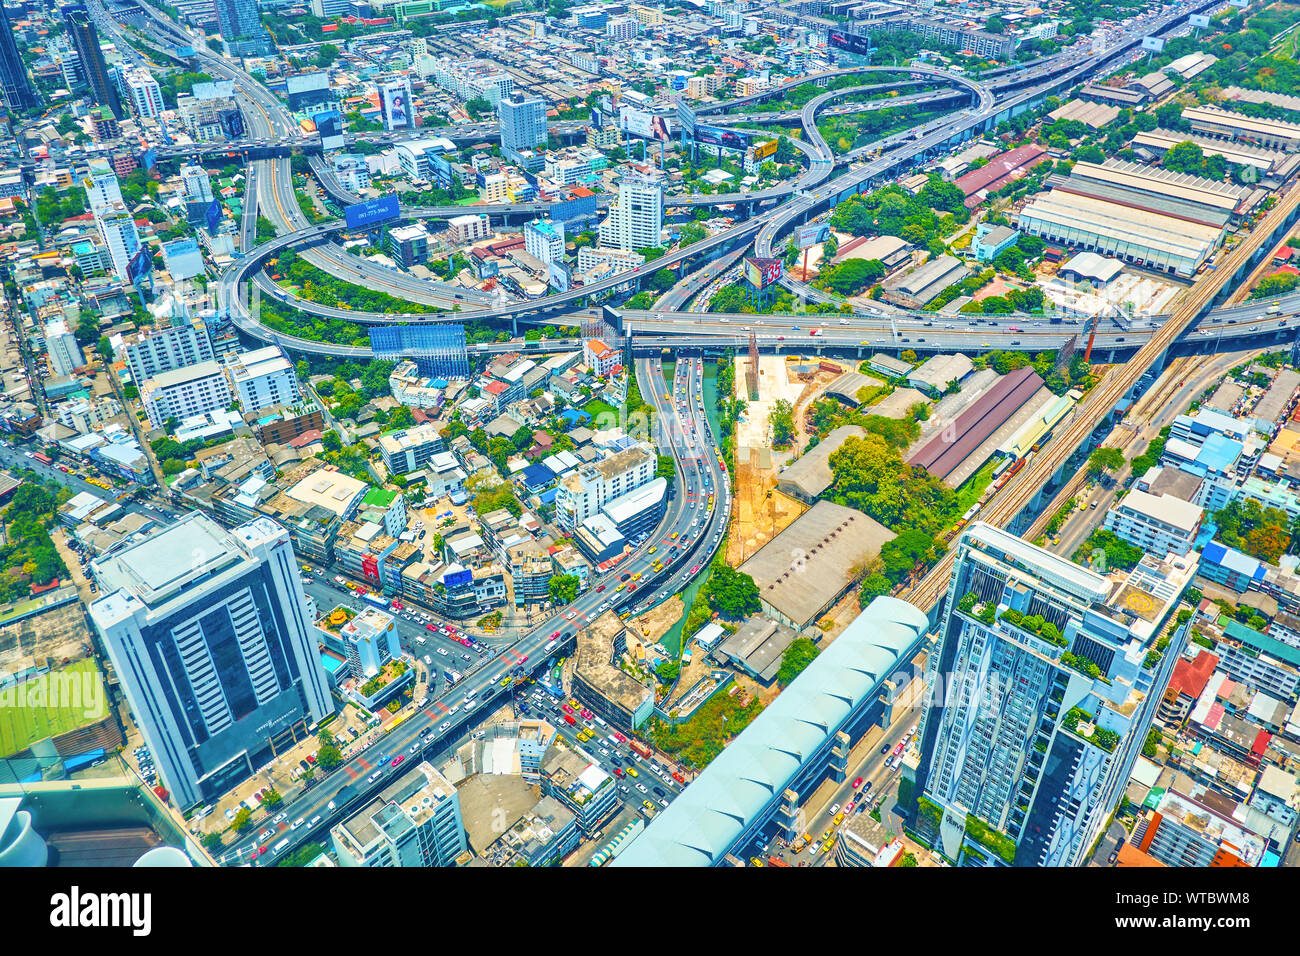 BANGKOK, THAILAND - APRIL 24, 2019: The large highway intersection with multi height roads in the heart of modern city connects various remote distric Stock Photo